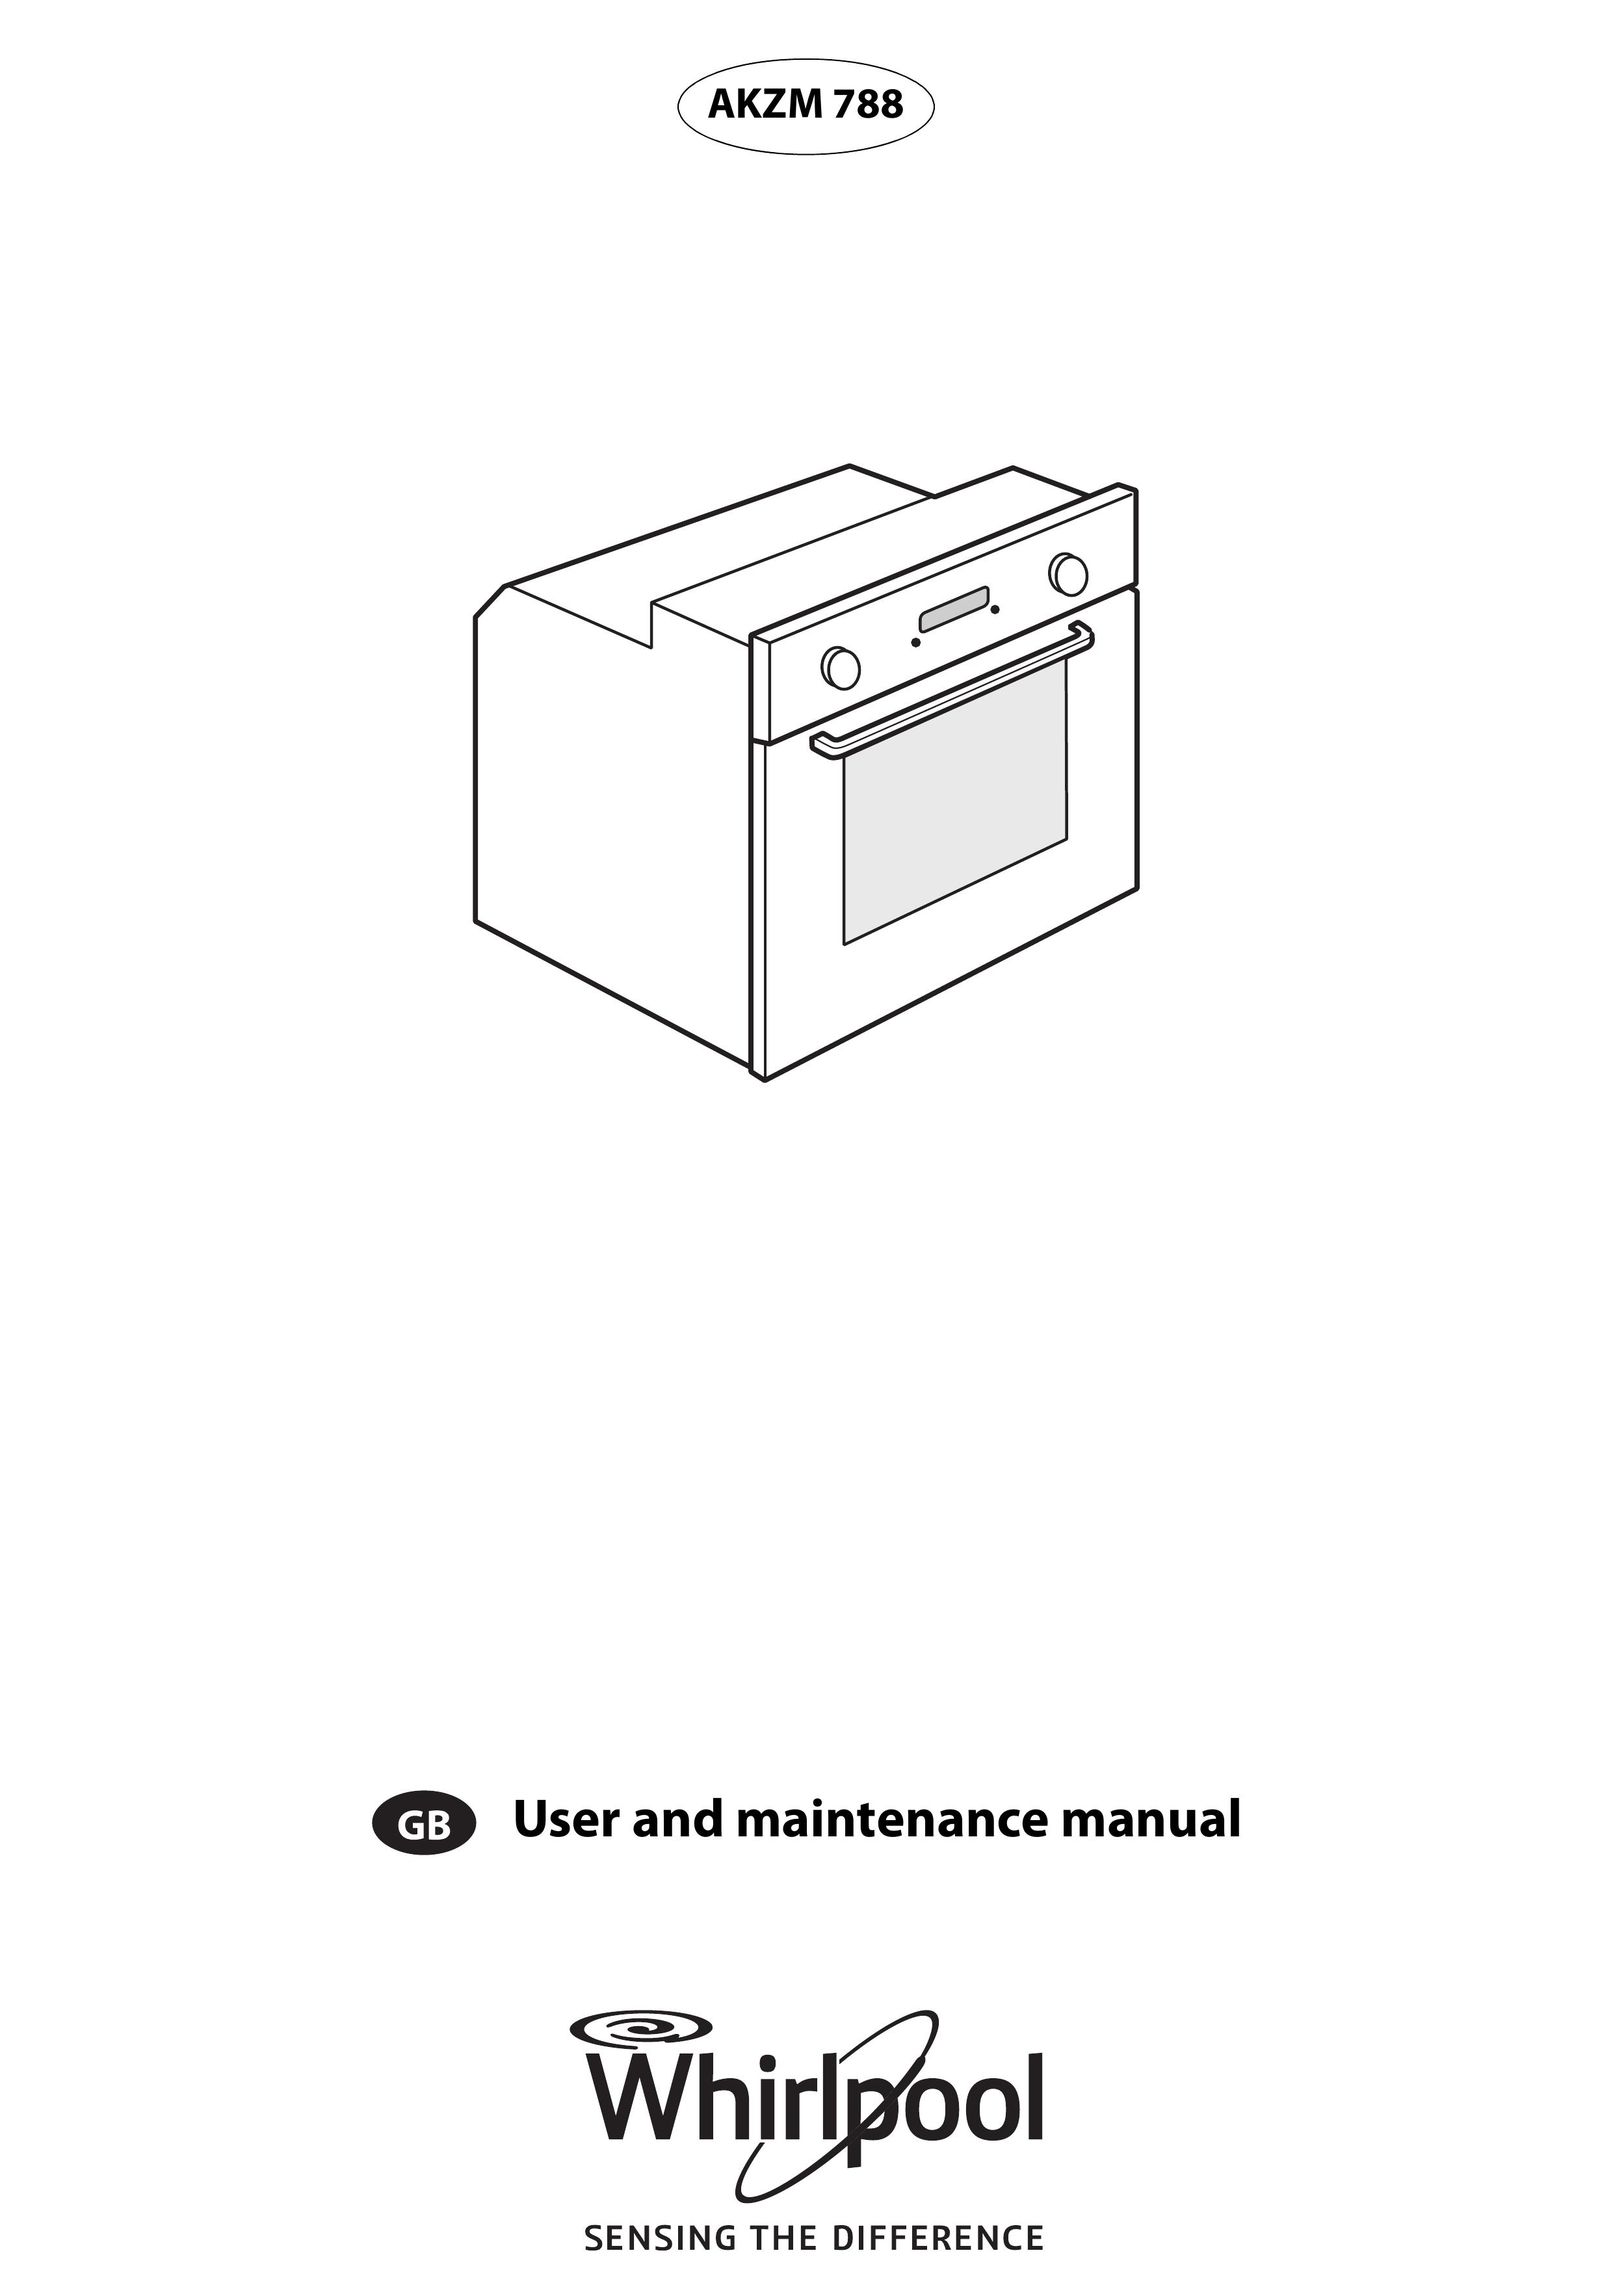 Whirlpool AKZM 788 Double Oven User Manual